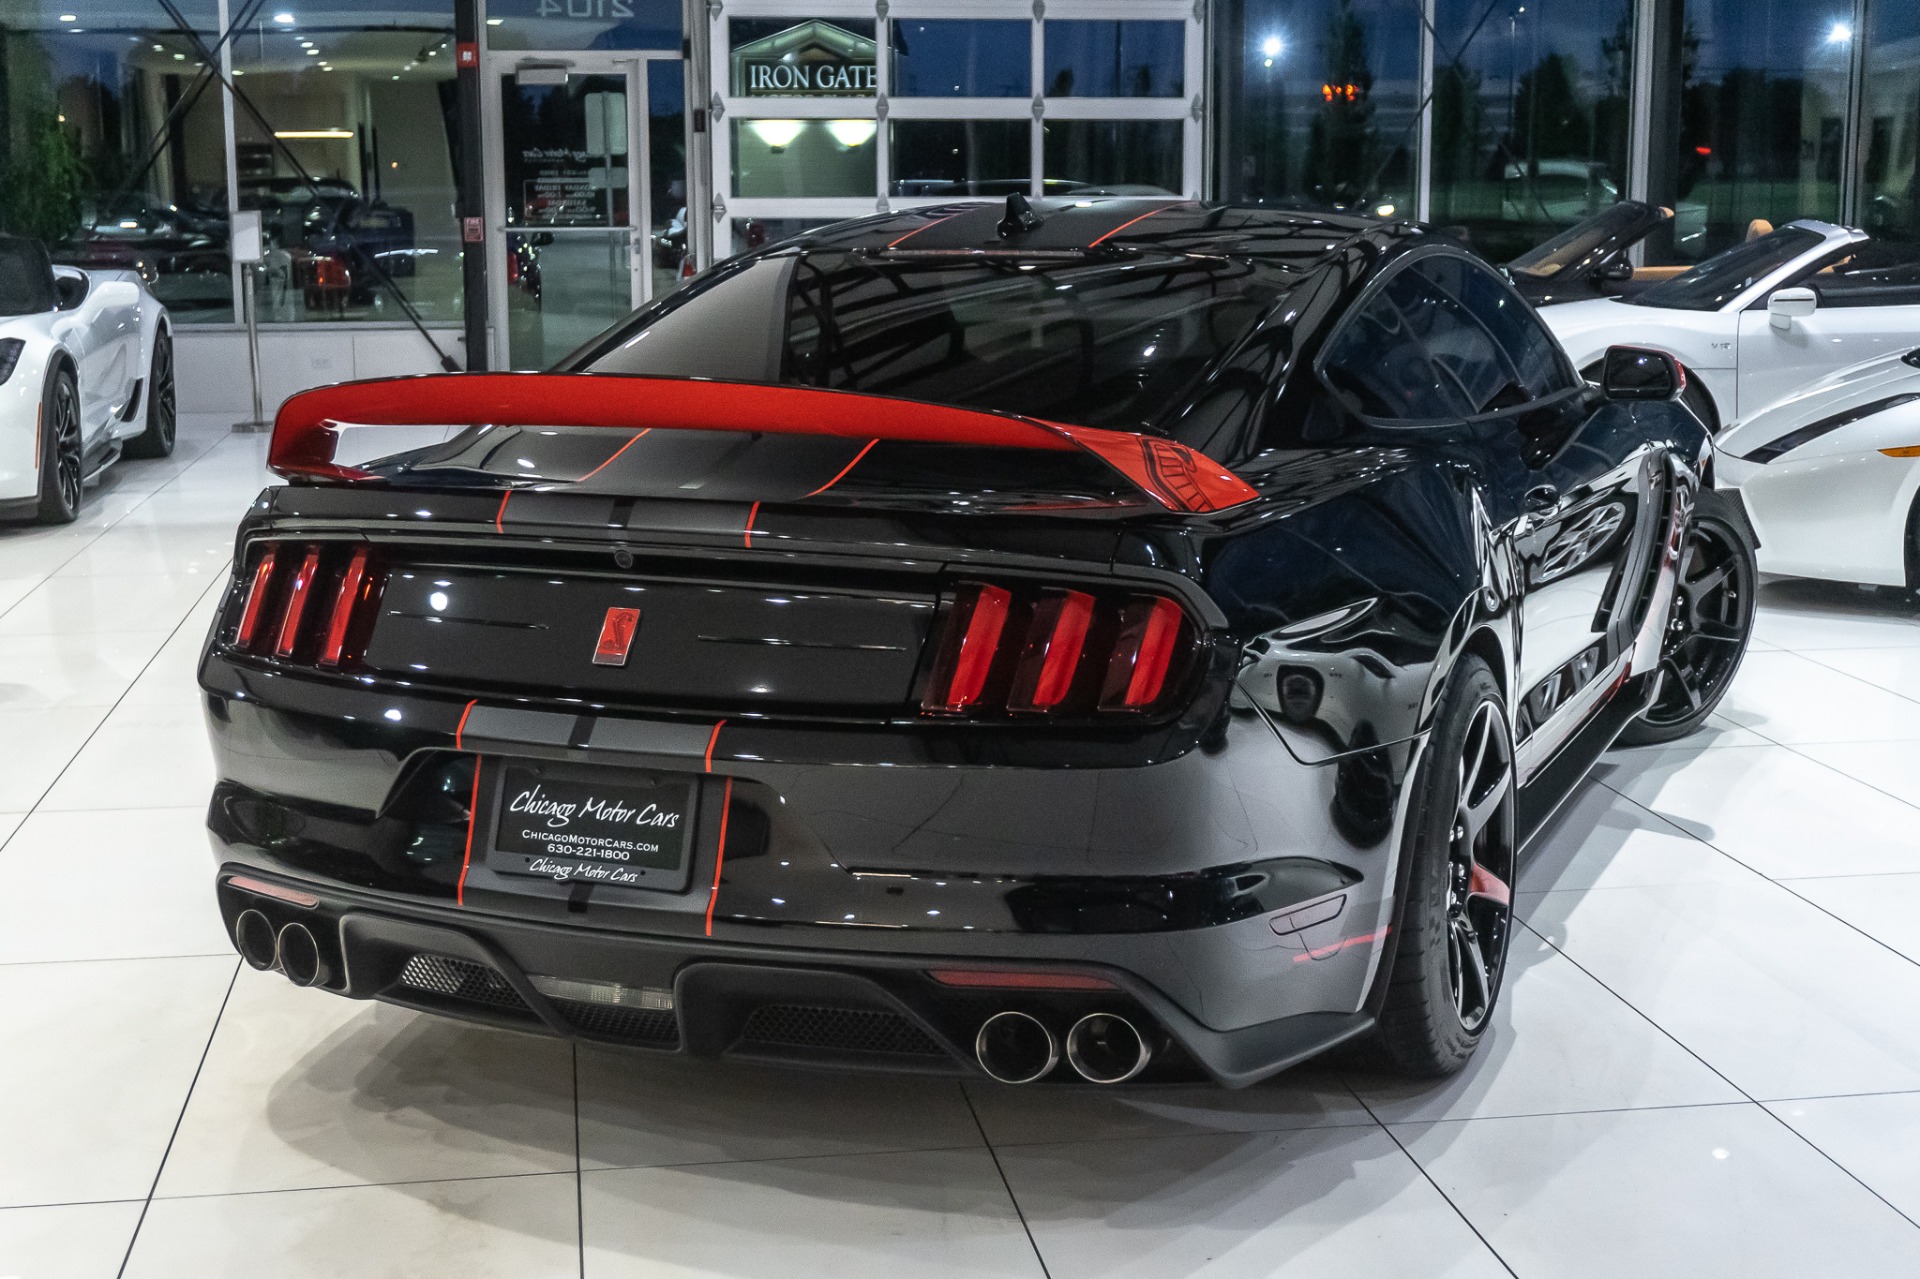 Used-2020-Ford-Mustang-Shelby-GT350R-6-SPEED-Only-1280-Miles-Tech-Pack-Cosmetic-Upgrades